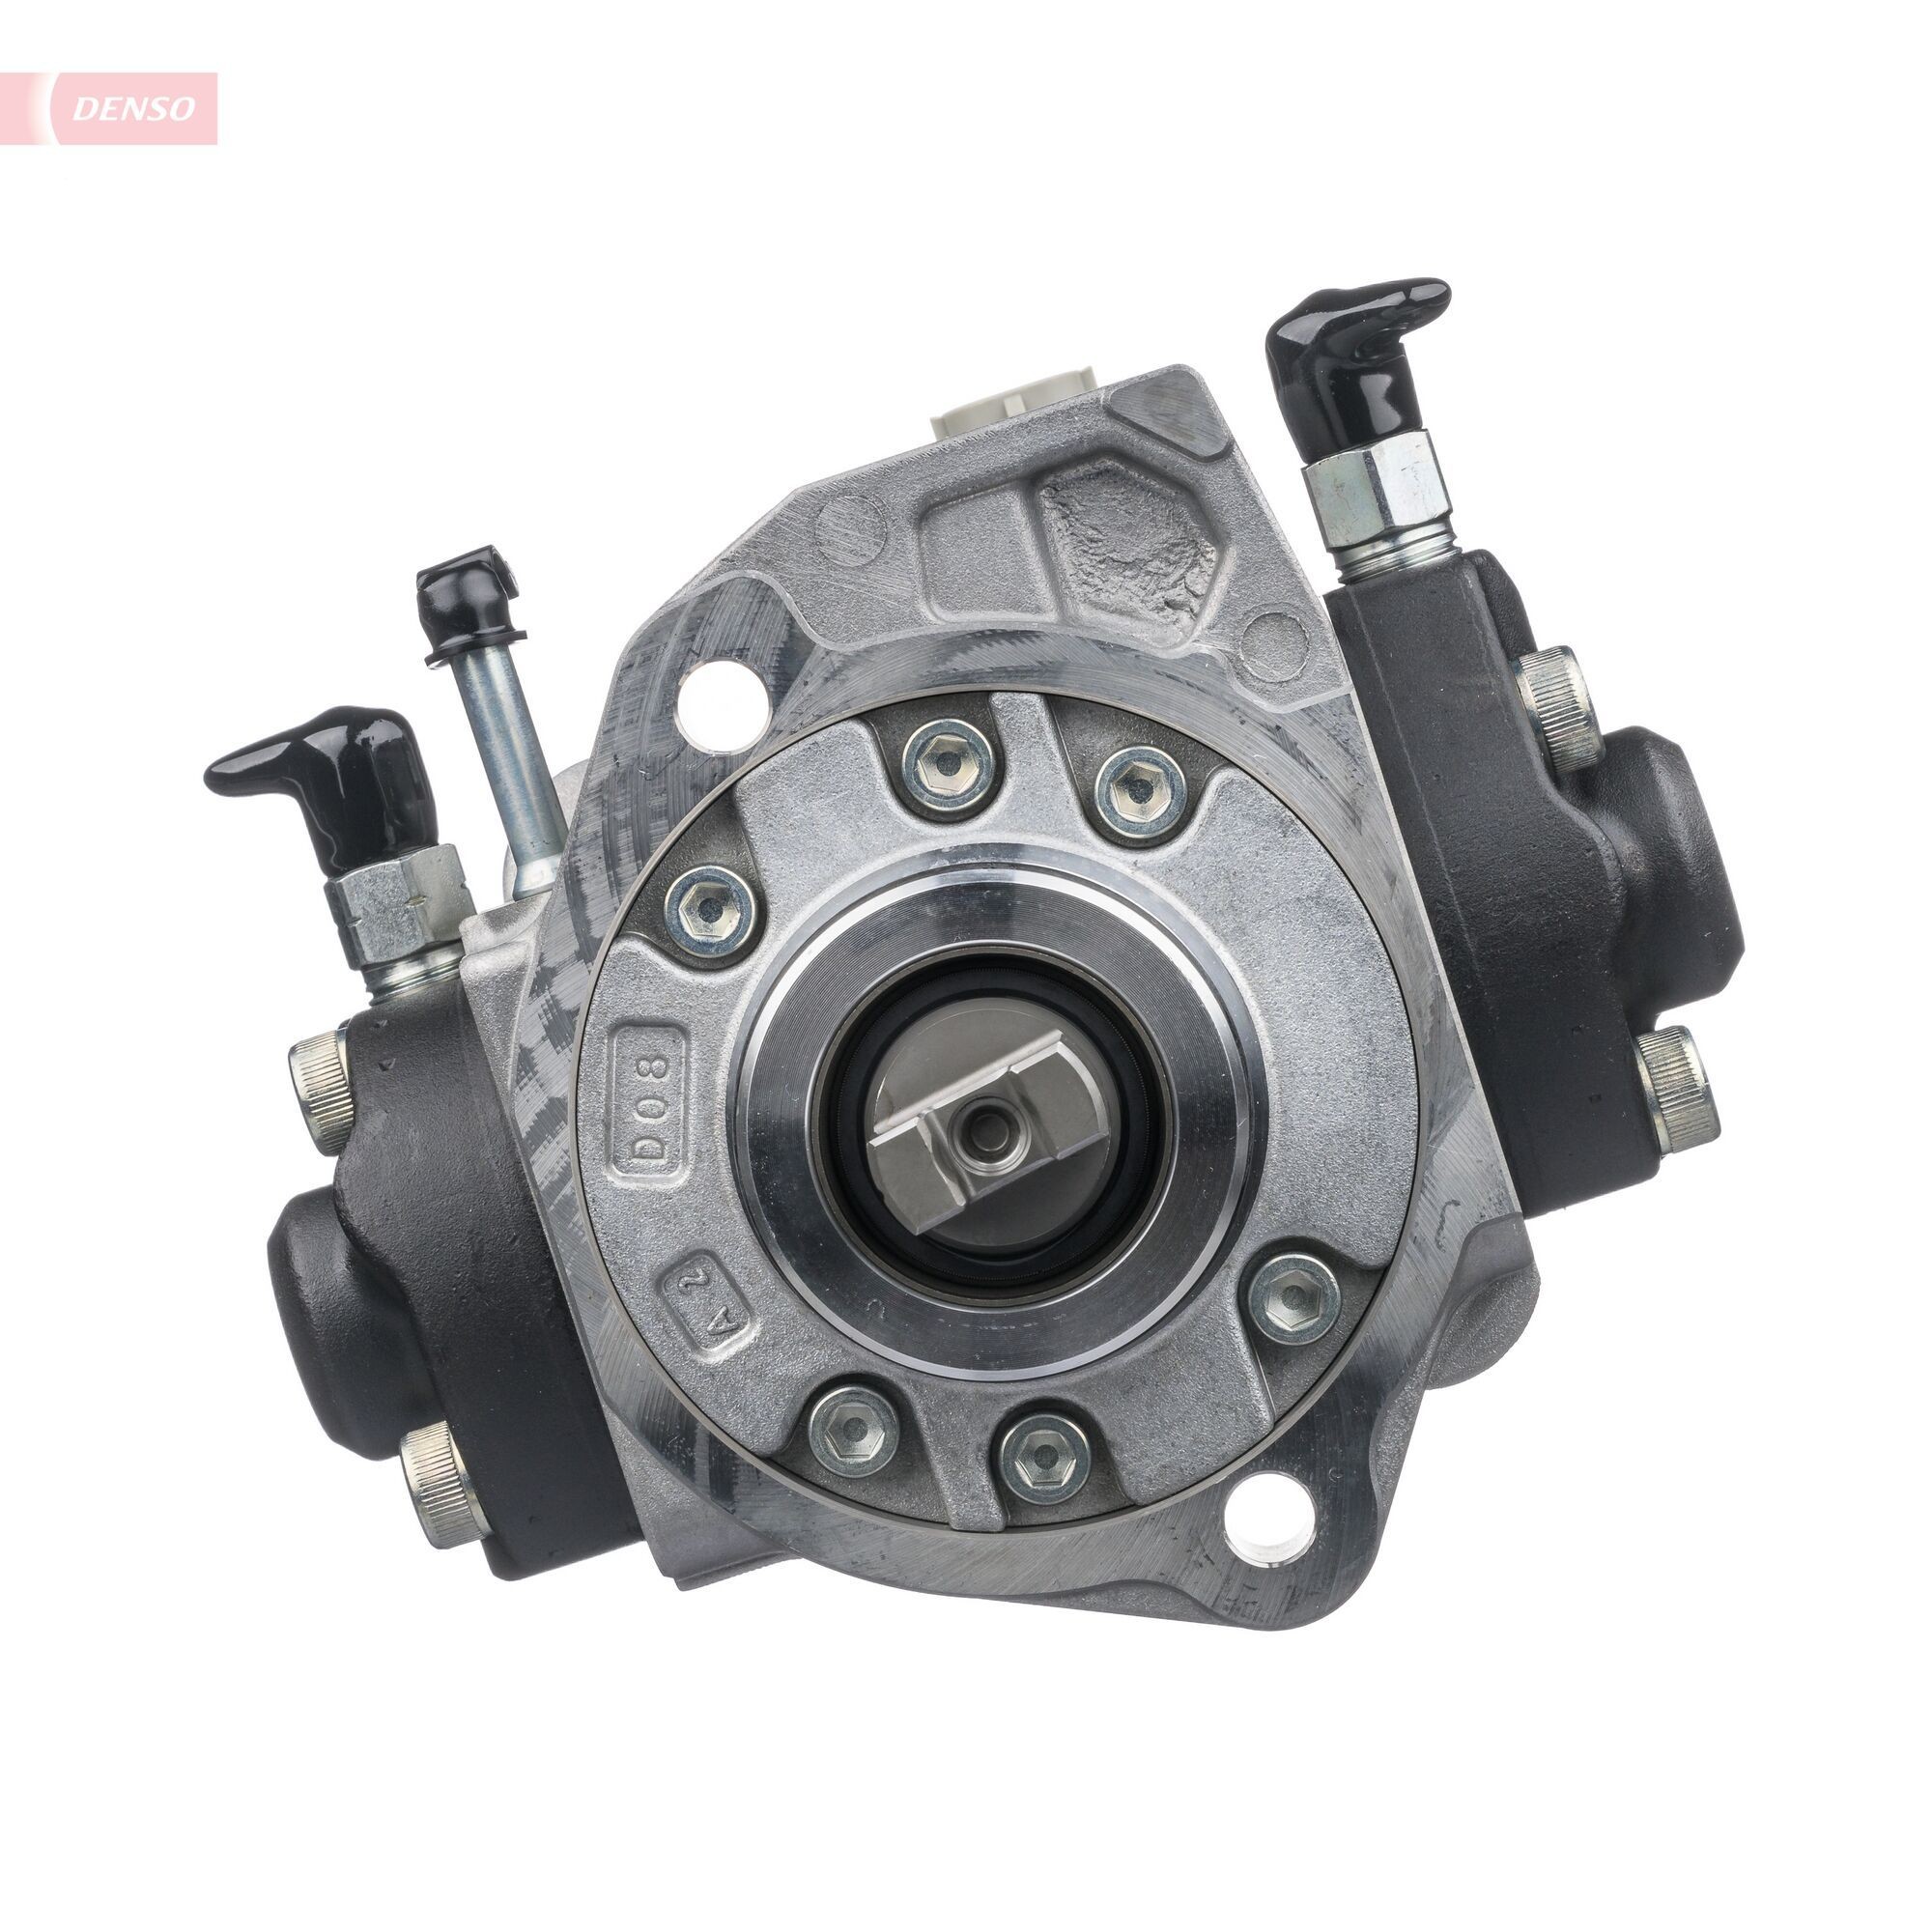 DCRP300990 DENSO Fuel injection pump NISSAN